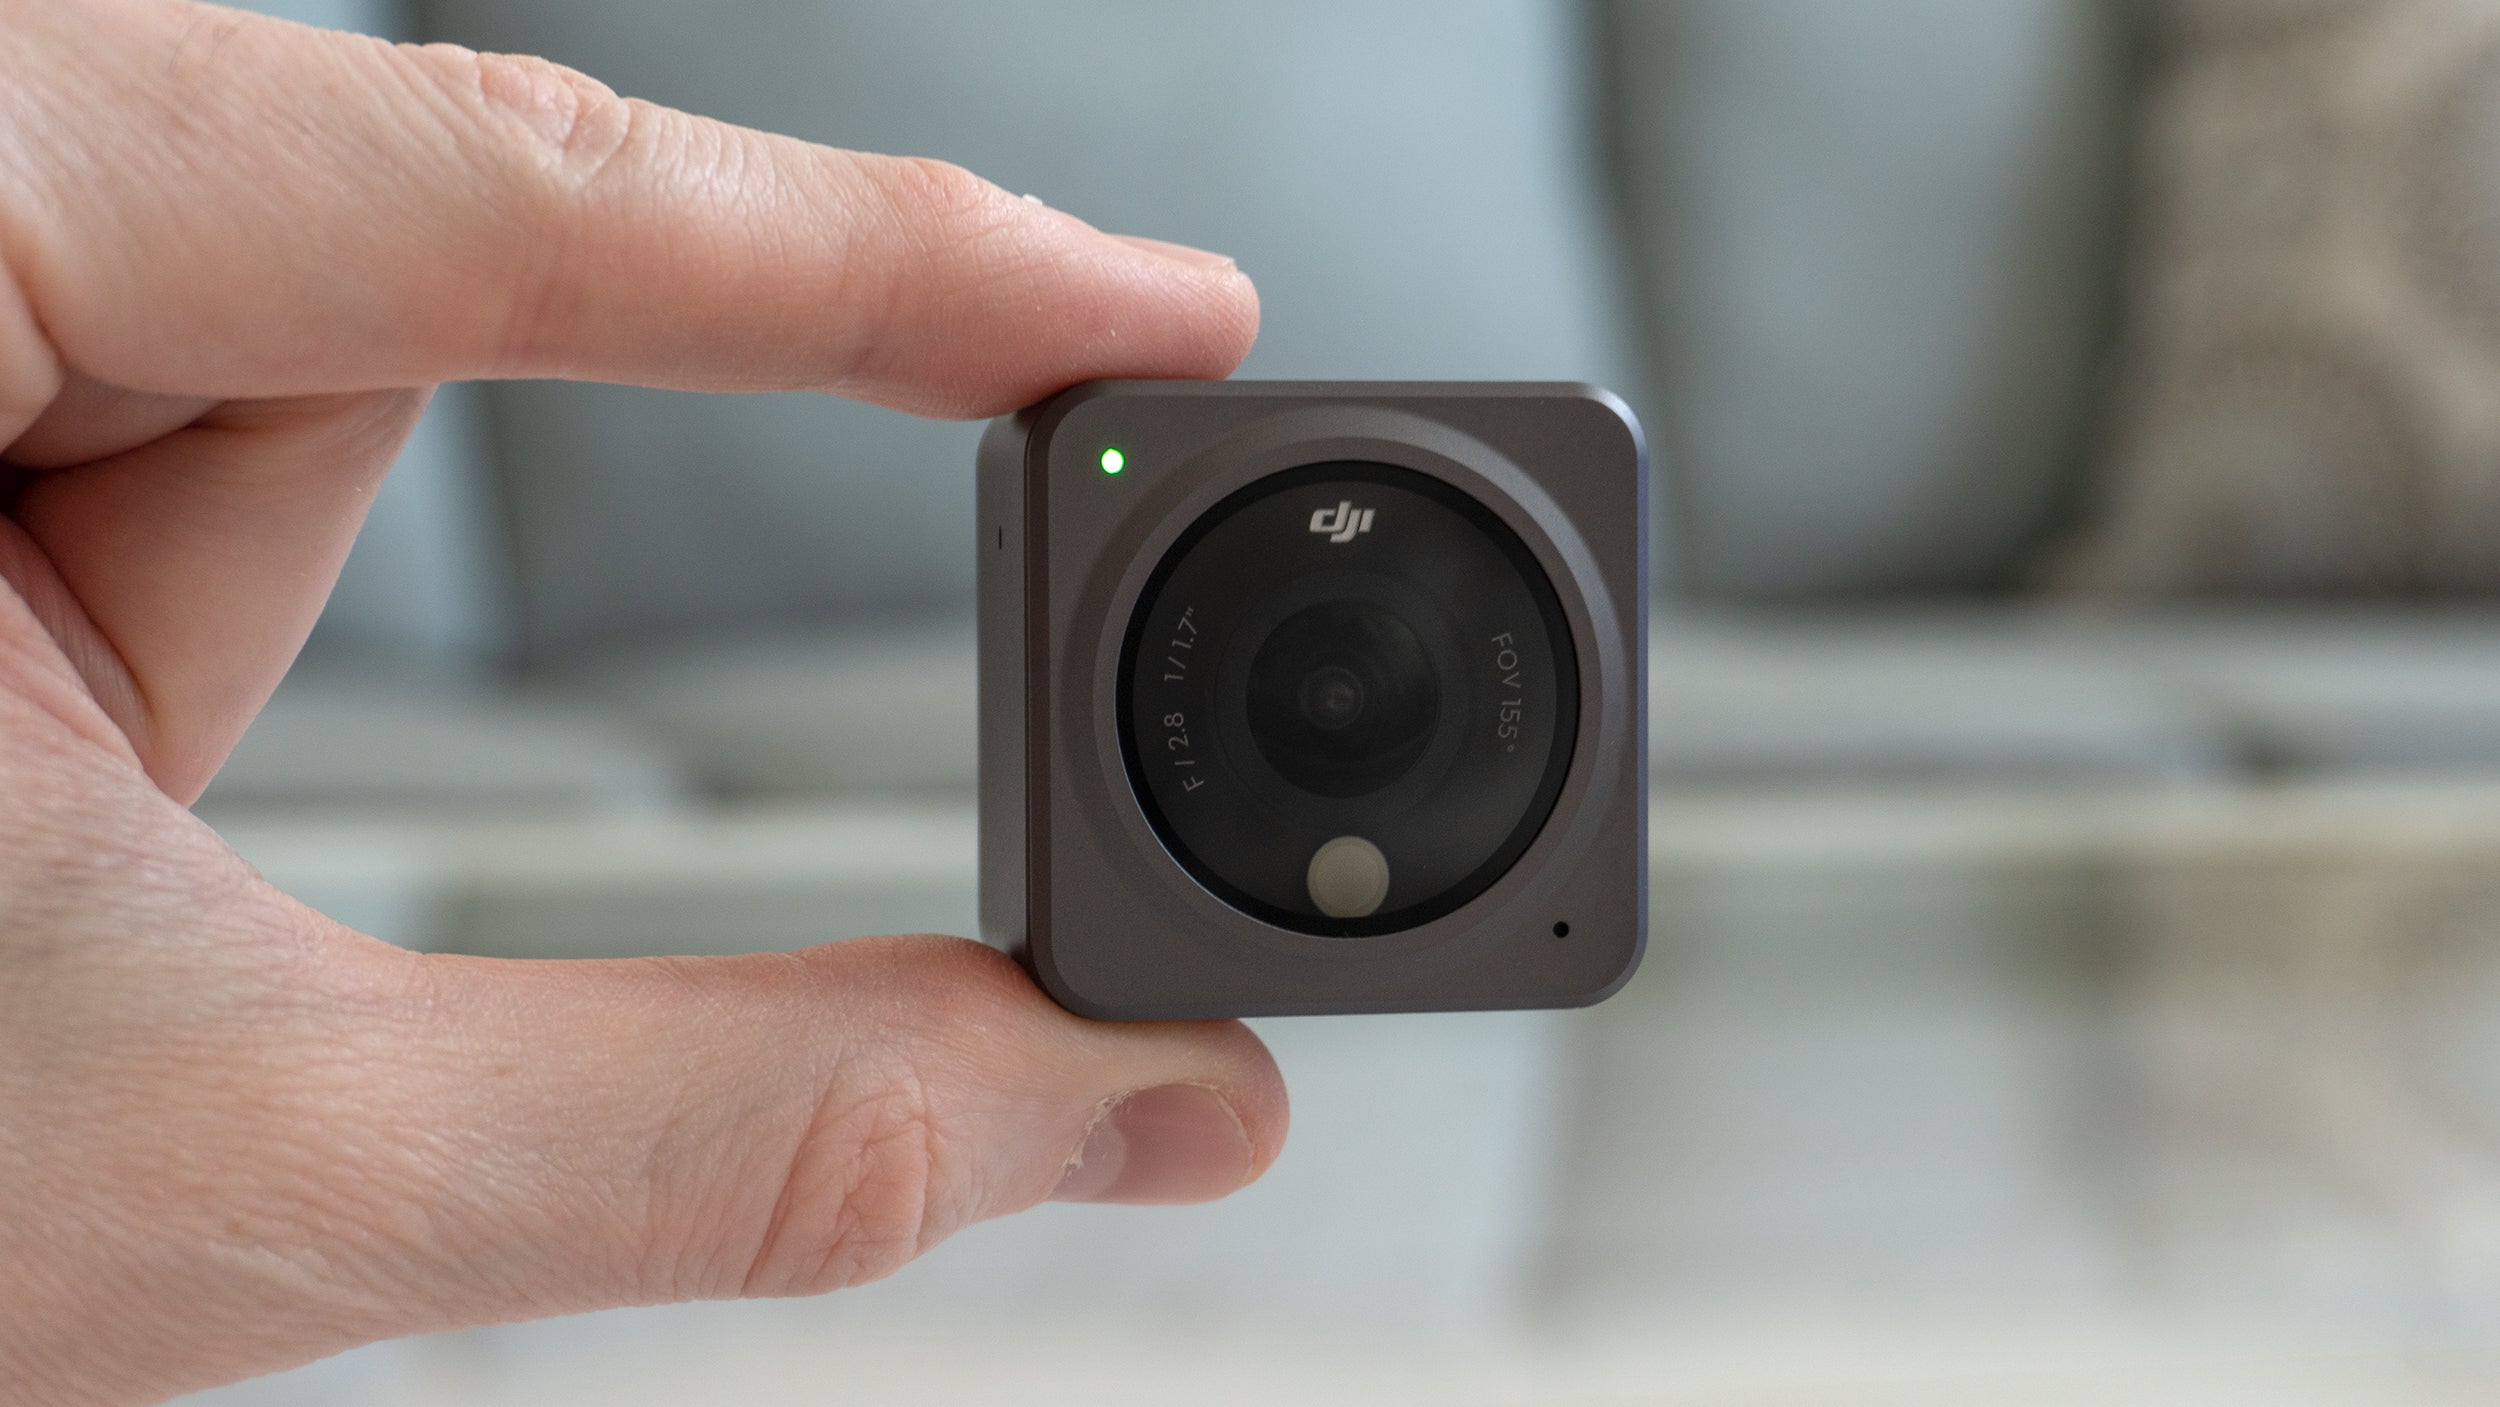 At just 1.5 inches on each side, the DJI Action 2 camera module is impressively compact. (Photo: Andrew Liszewski - Gizmodo)